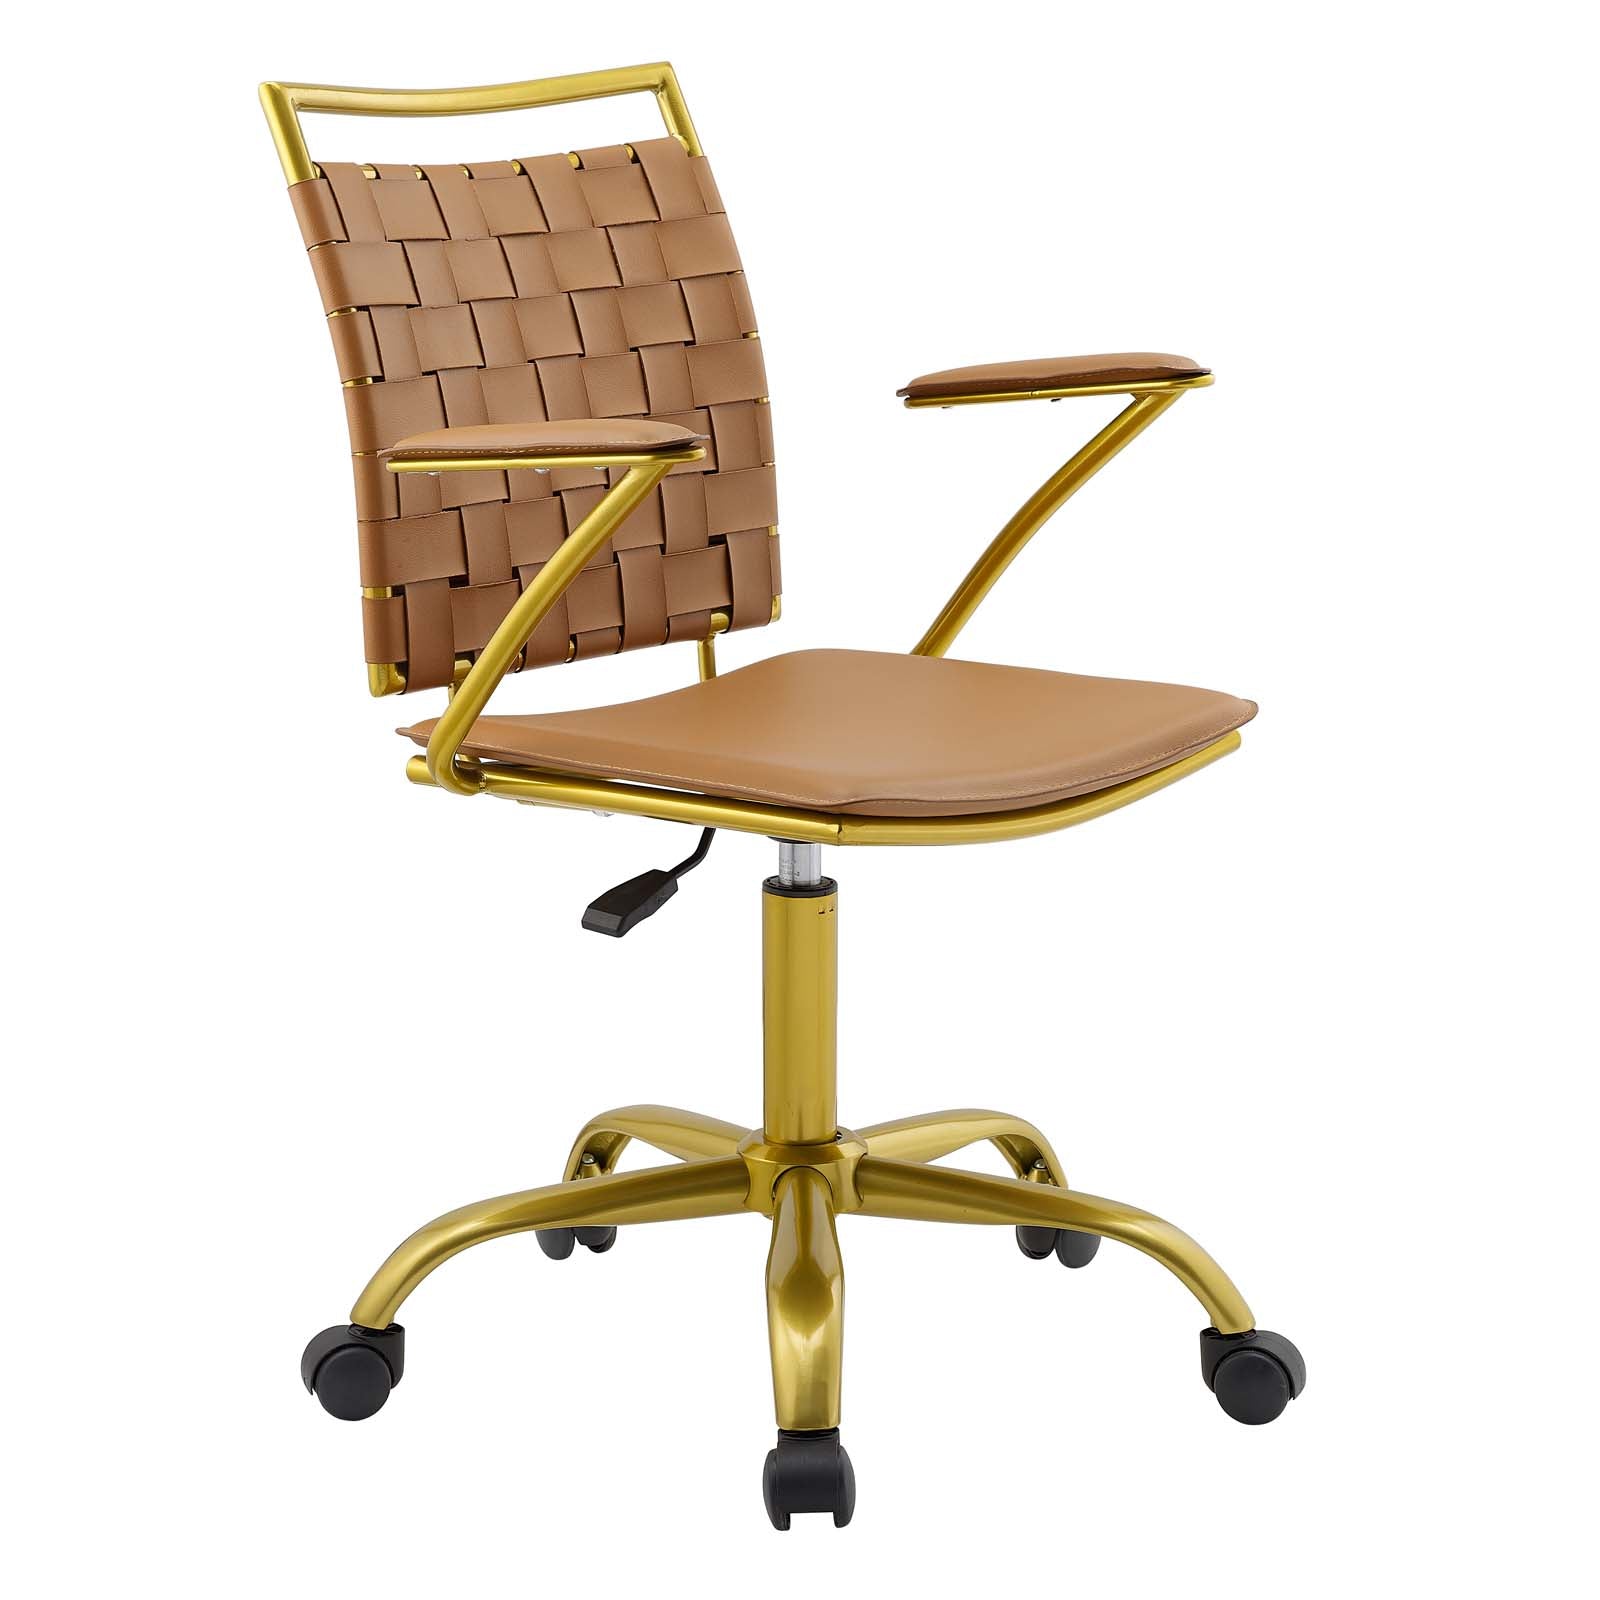 Fuse Gold Faux Leather Office Chair - Tan